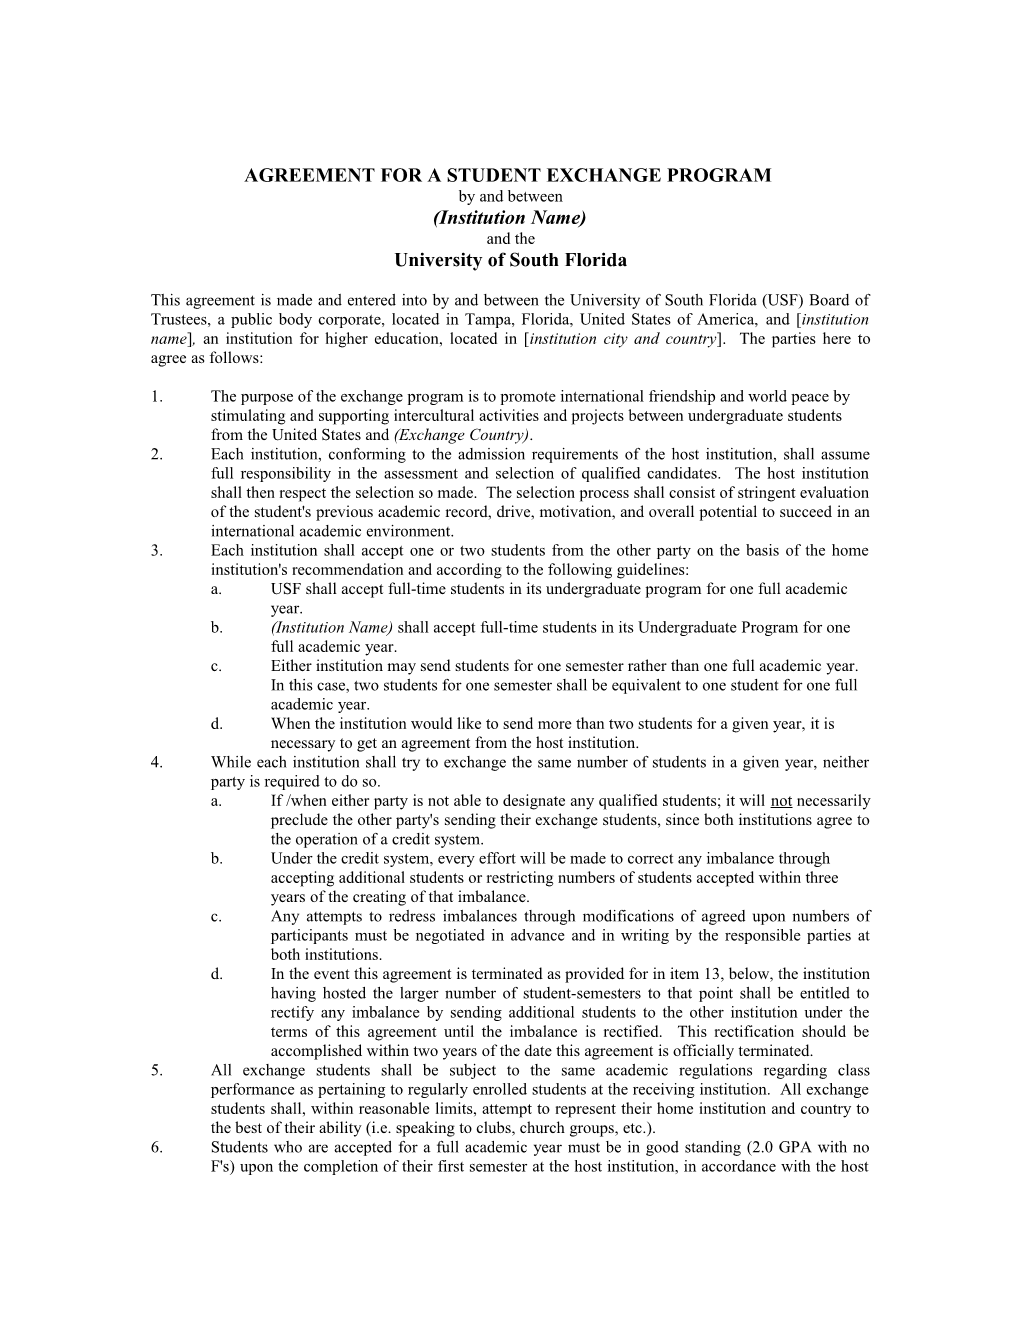 Agreement for a Student Exchange Program